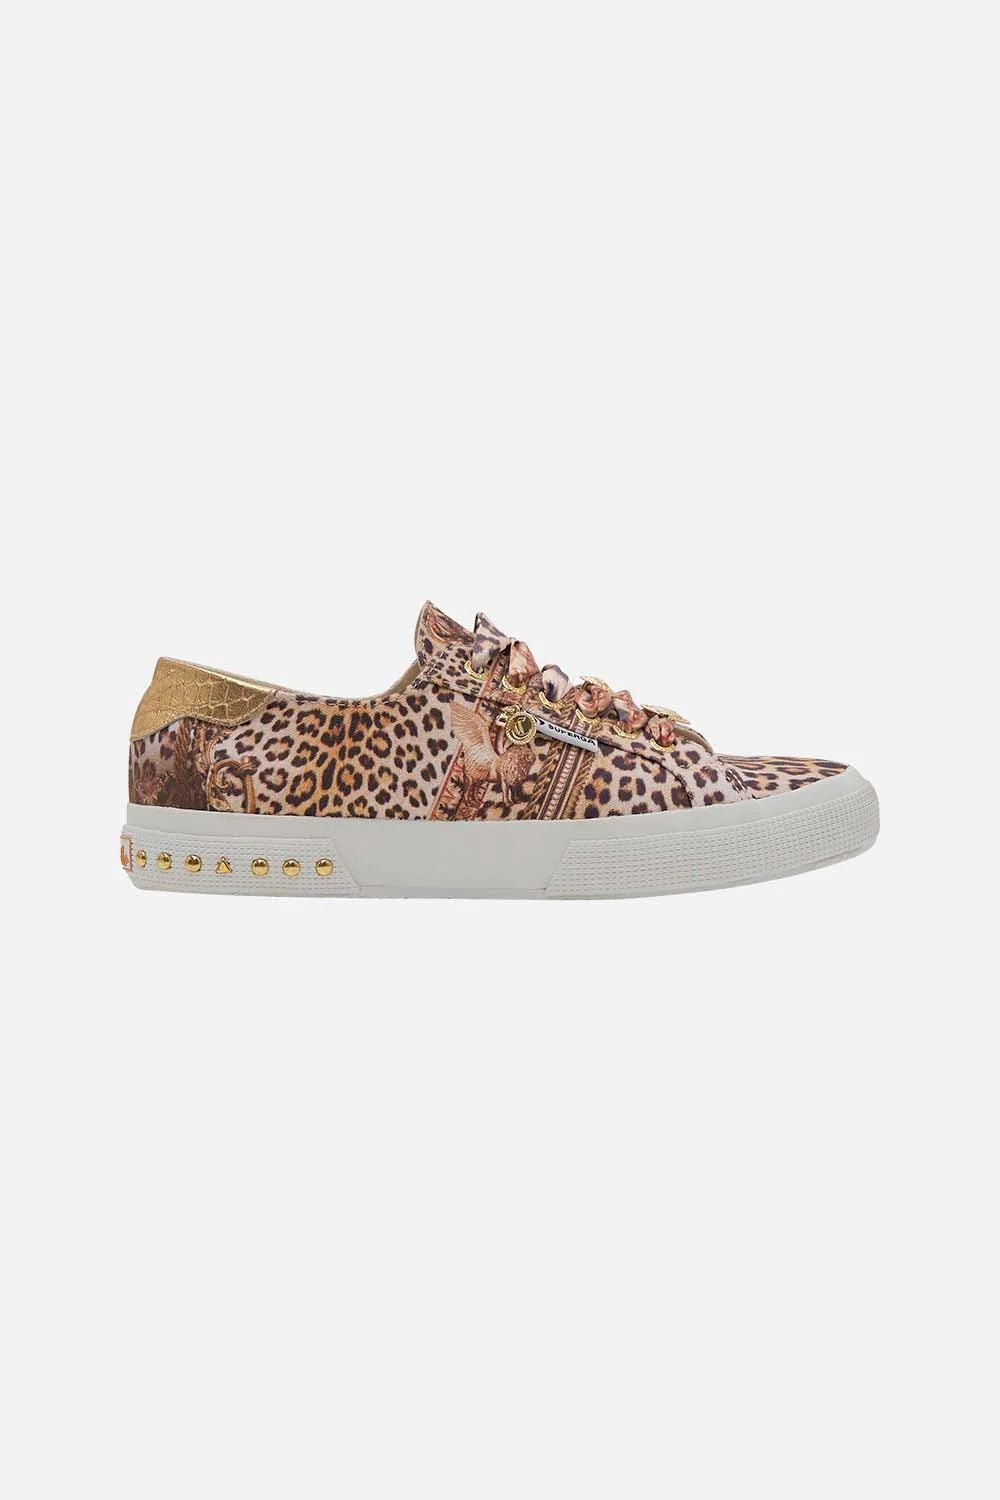 Standing Ovation Superga 2750 Printed Sneakers